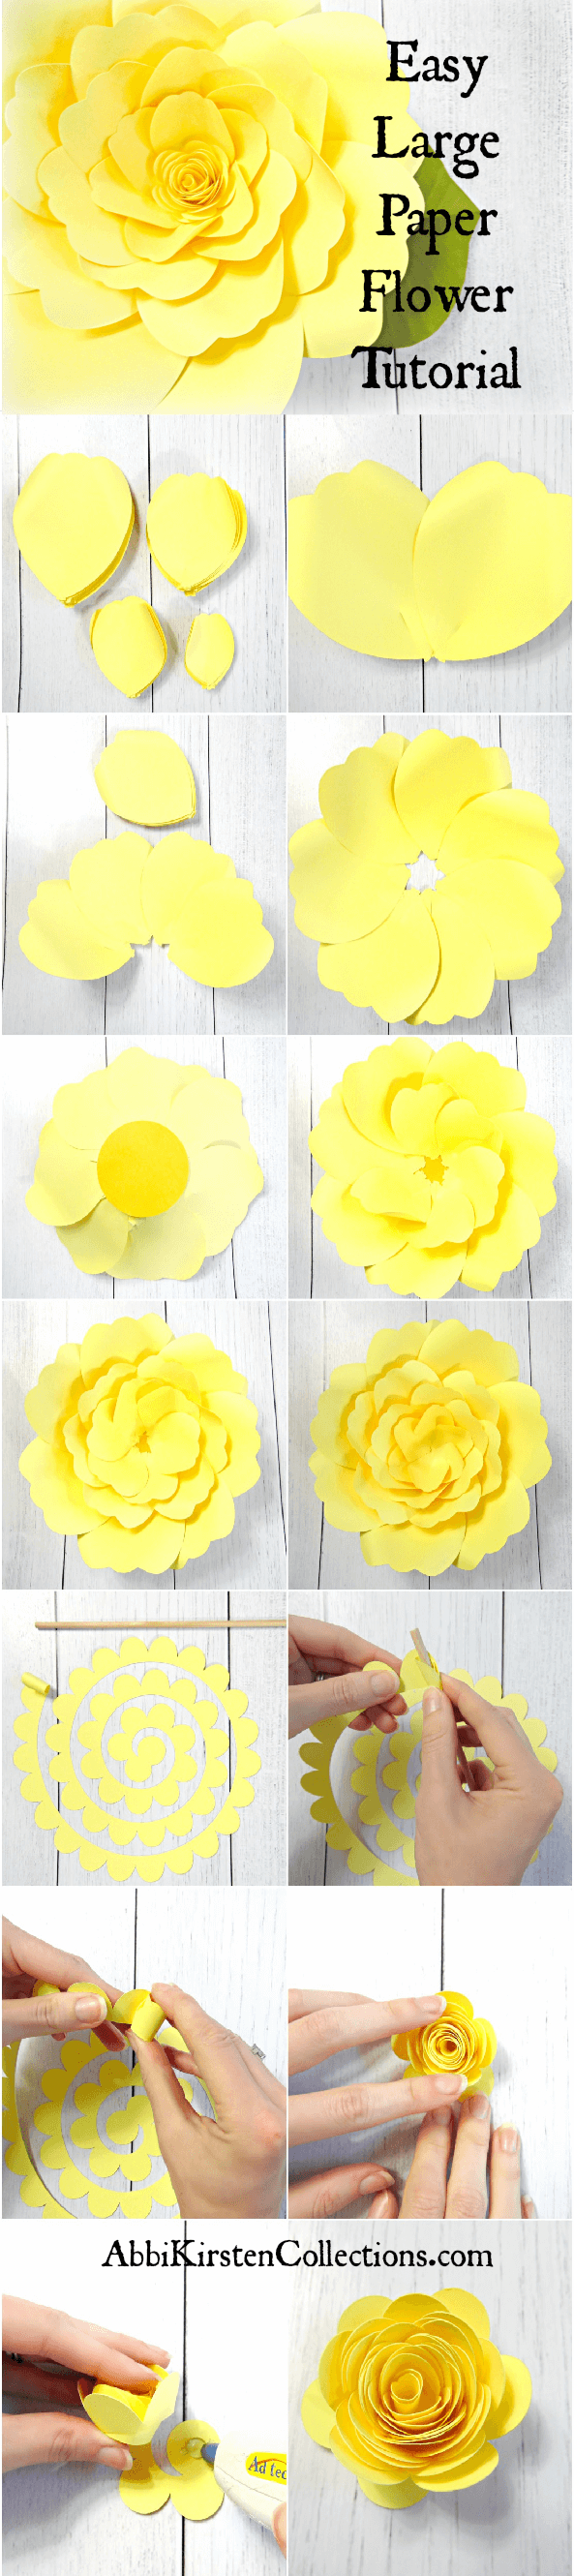 A collage of images showing all the steps to making a giant yellow Charlotte rose tutorial. The text on the image says, "easy large paper flower tutorial"